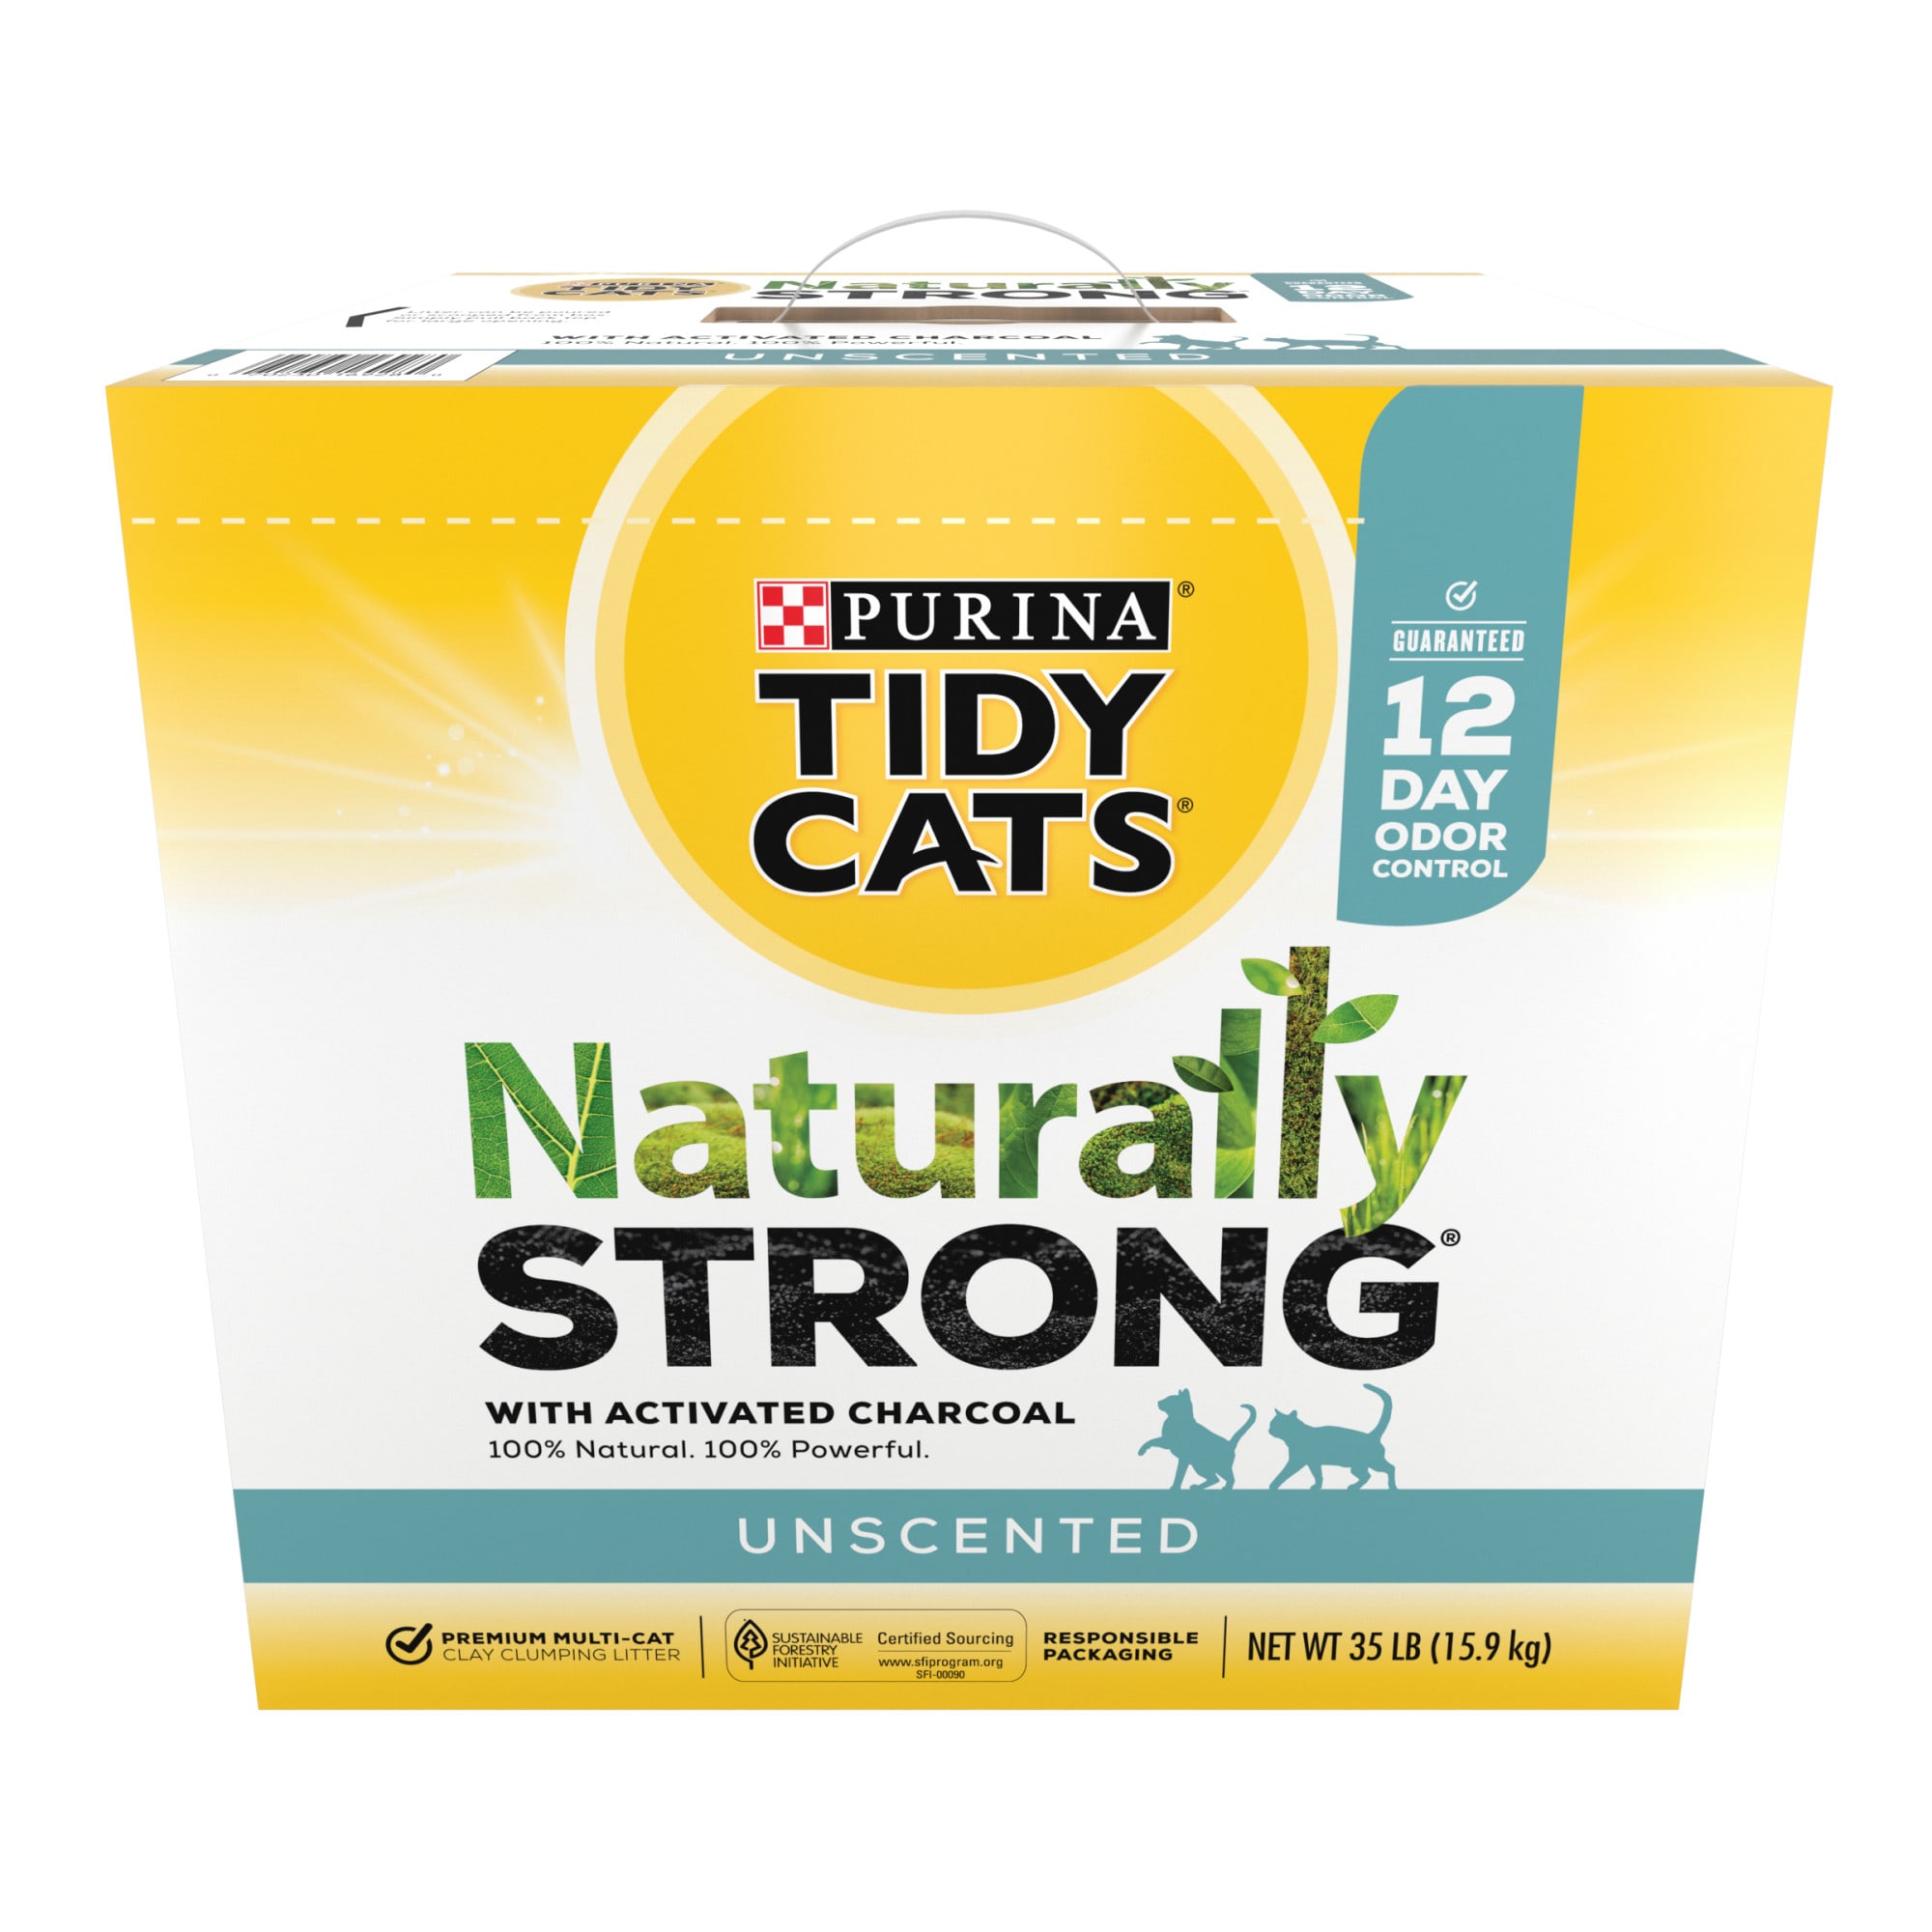 Tidy Cats Unscented Naturally Strong Clumping MultiCat Litter, 35 lbs